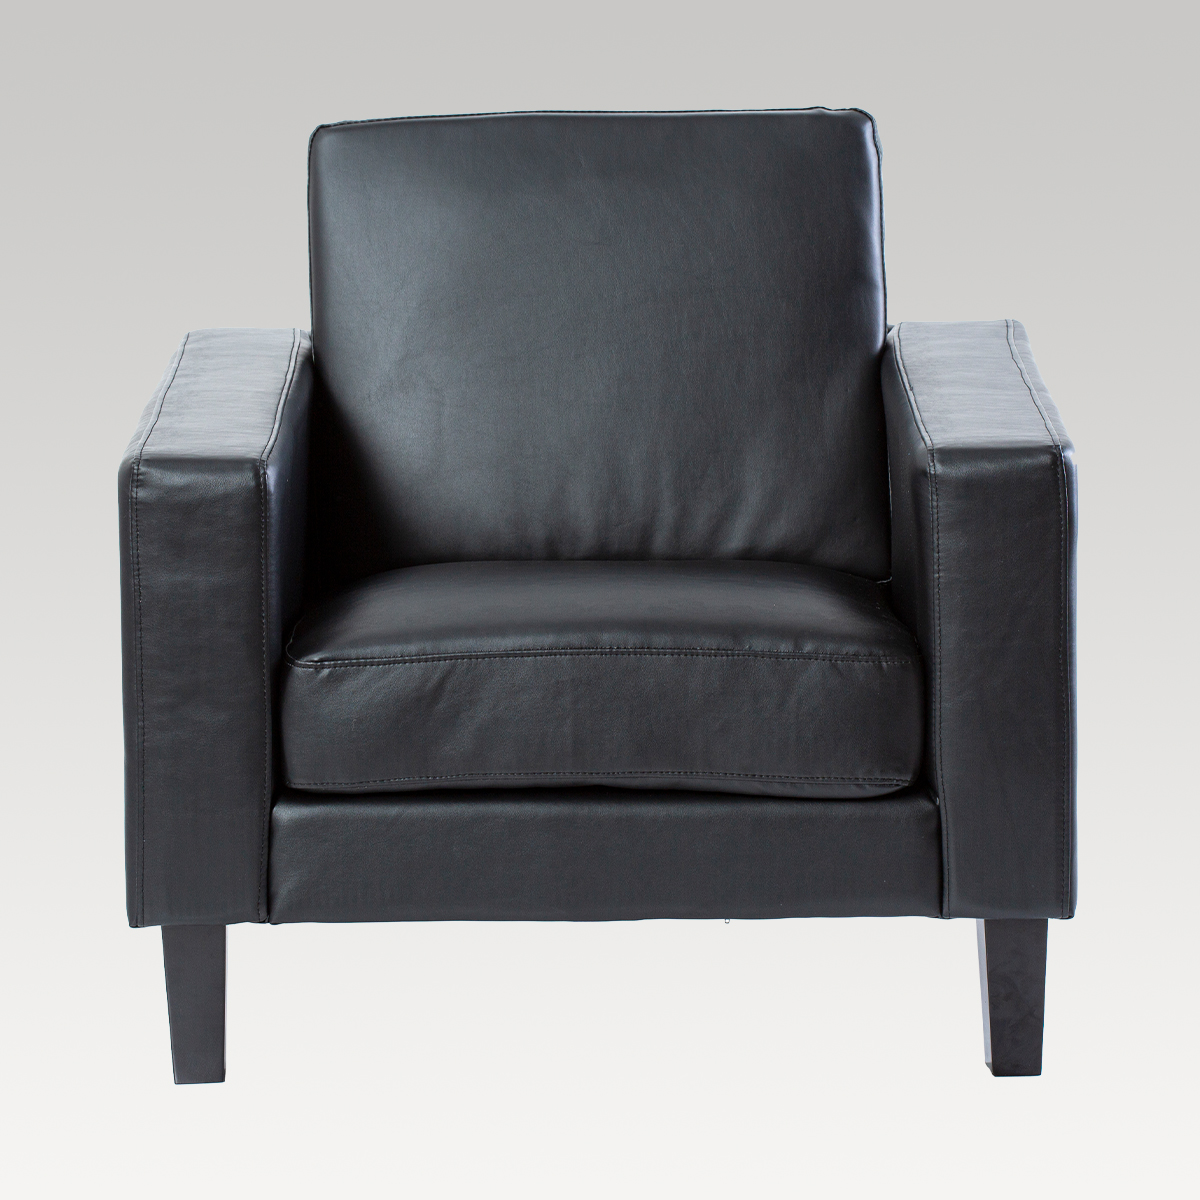 Image of Makers Fenix PU Single Seater Chair - Black